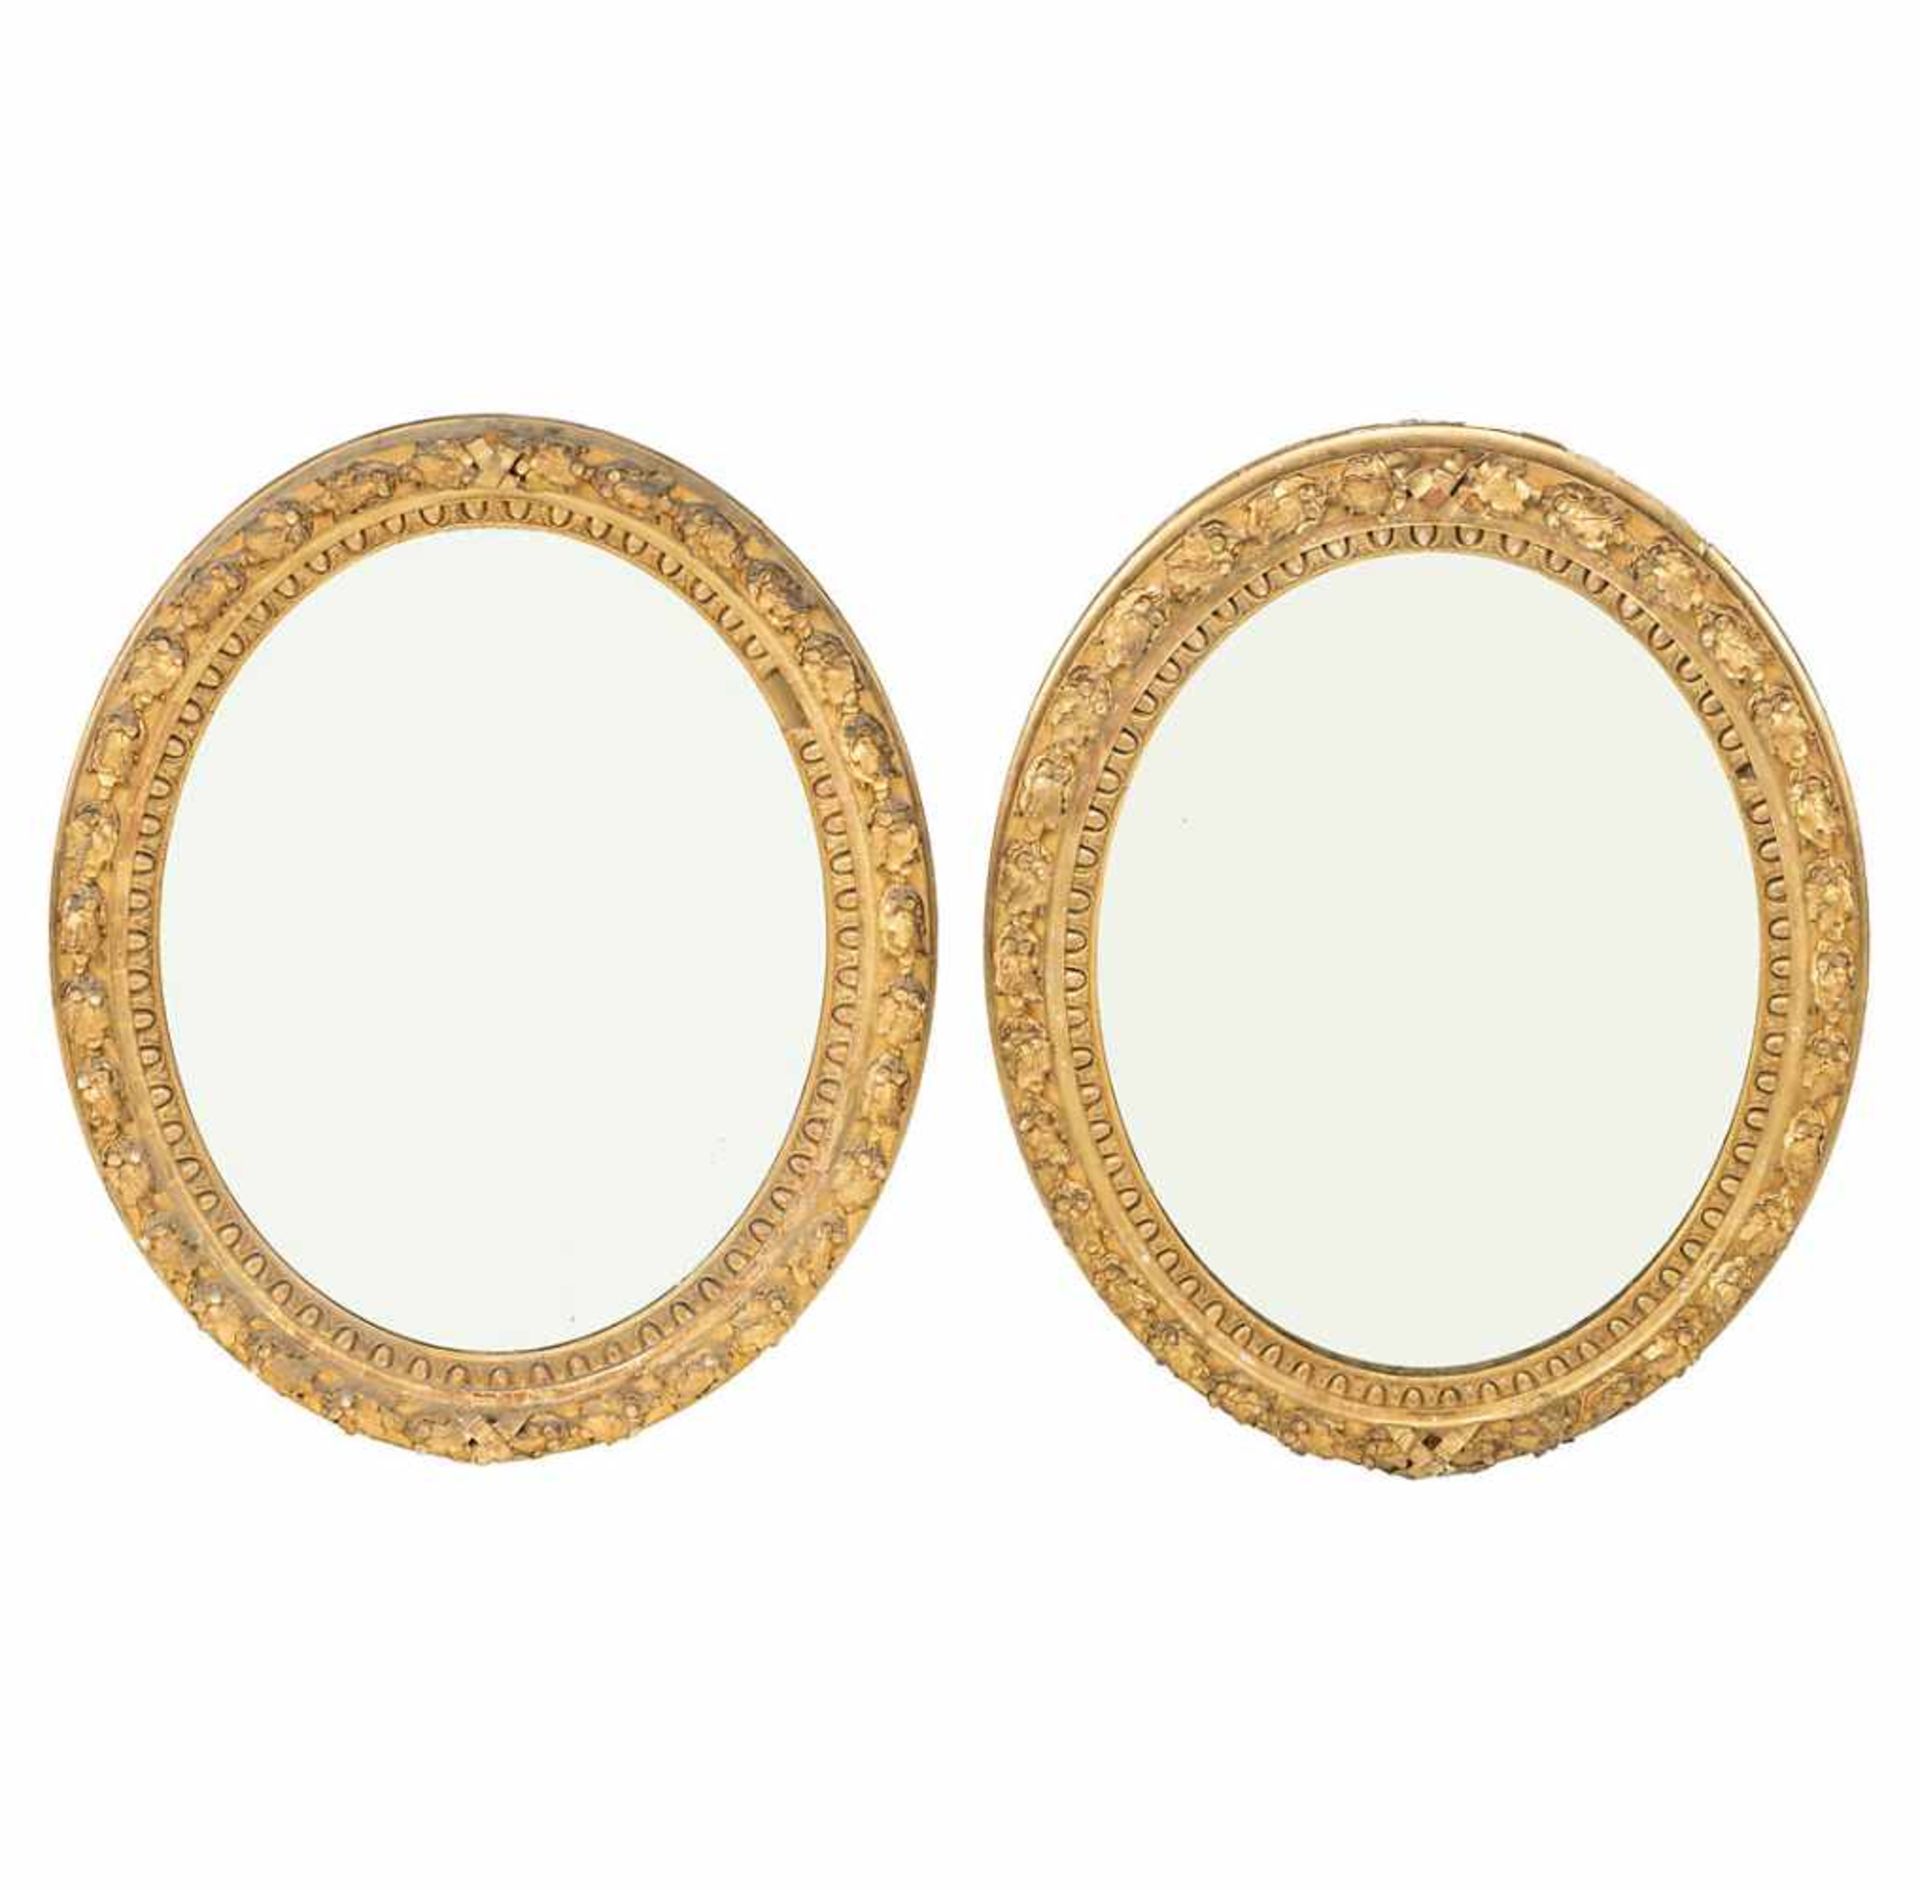 Pair of large oval mirrors with Napoleon III frames in gilt wood and stucco, third quarter of the